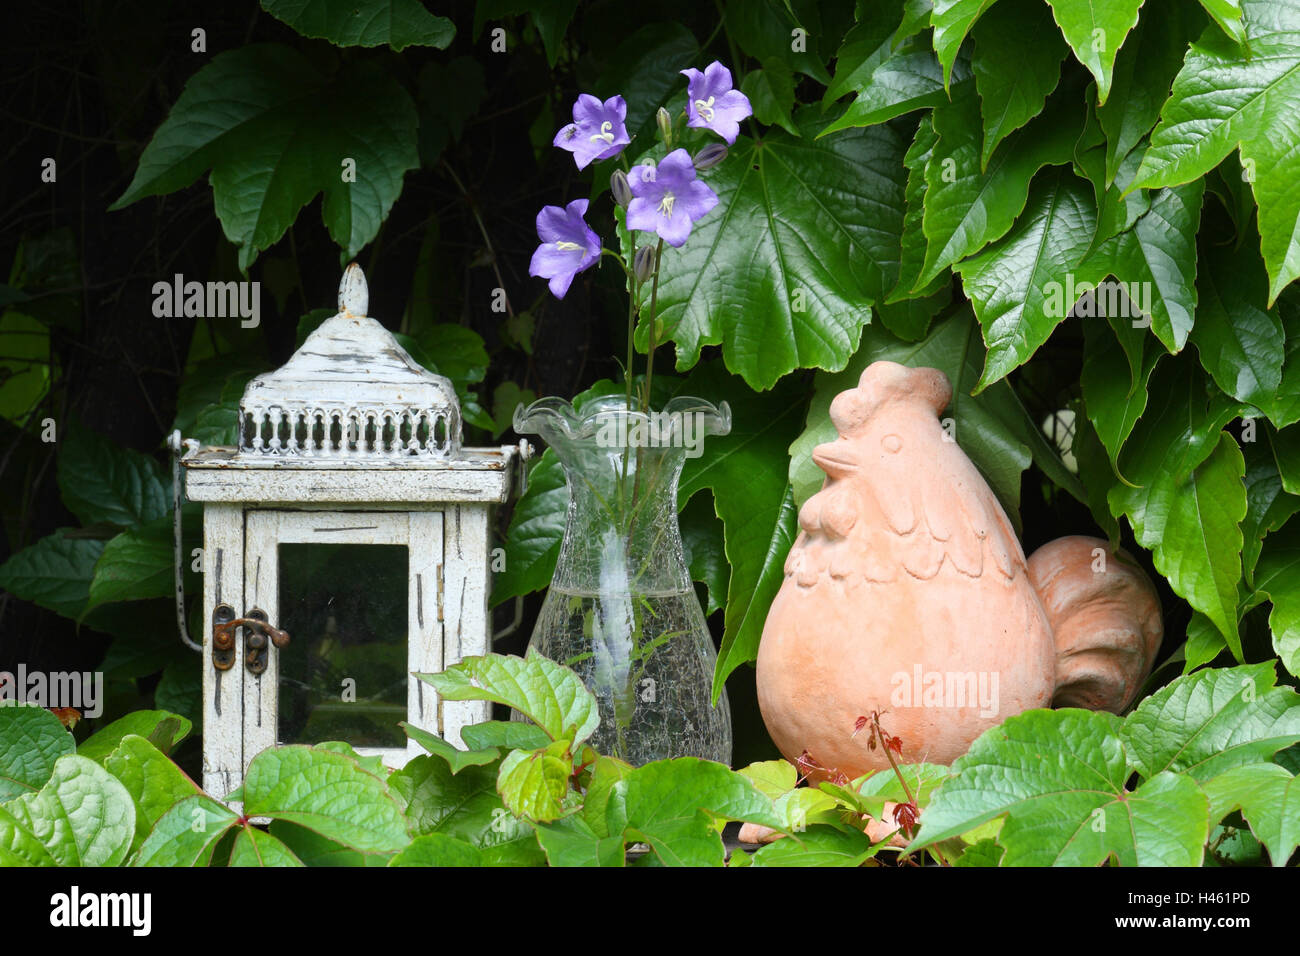 Lantern and vase with bellflowers, Stock Photo